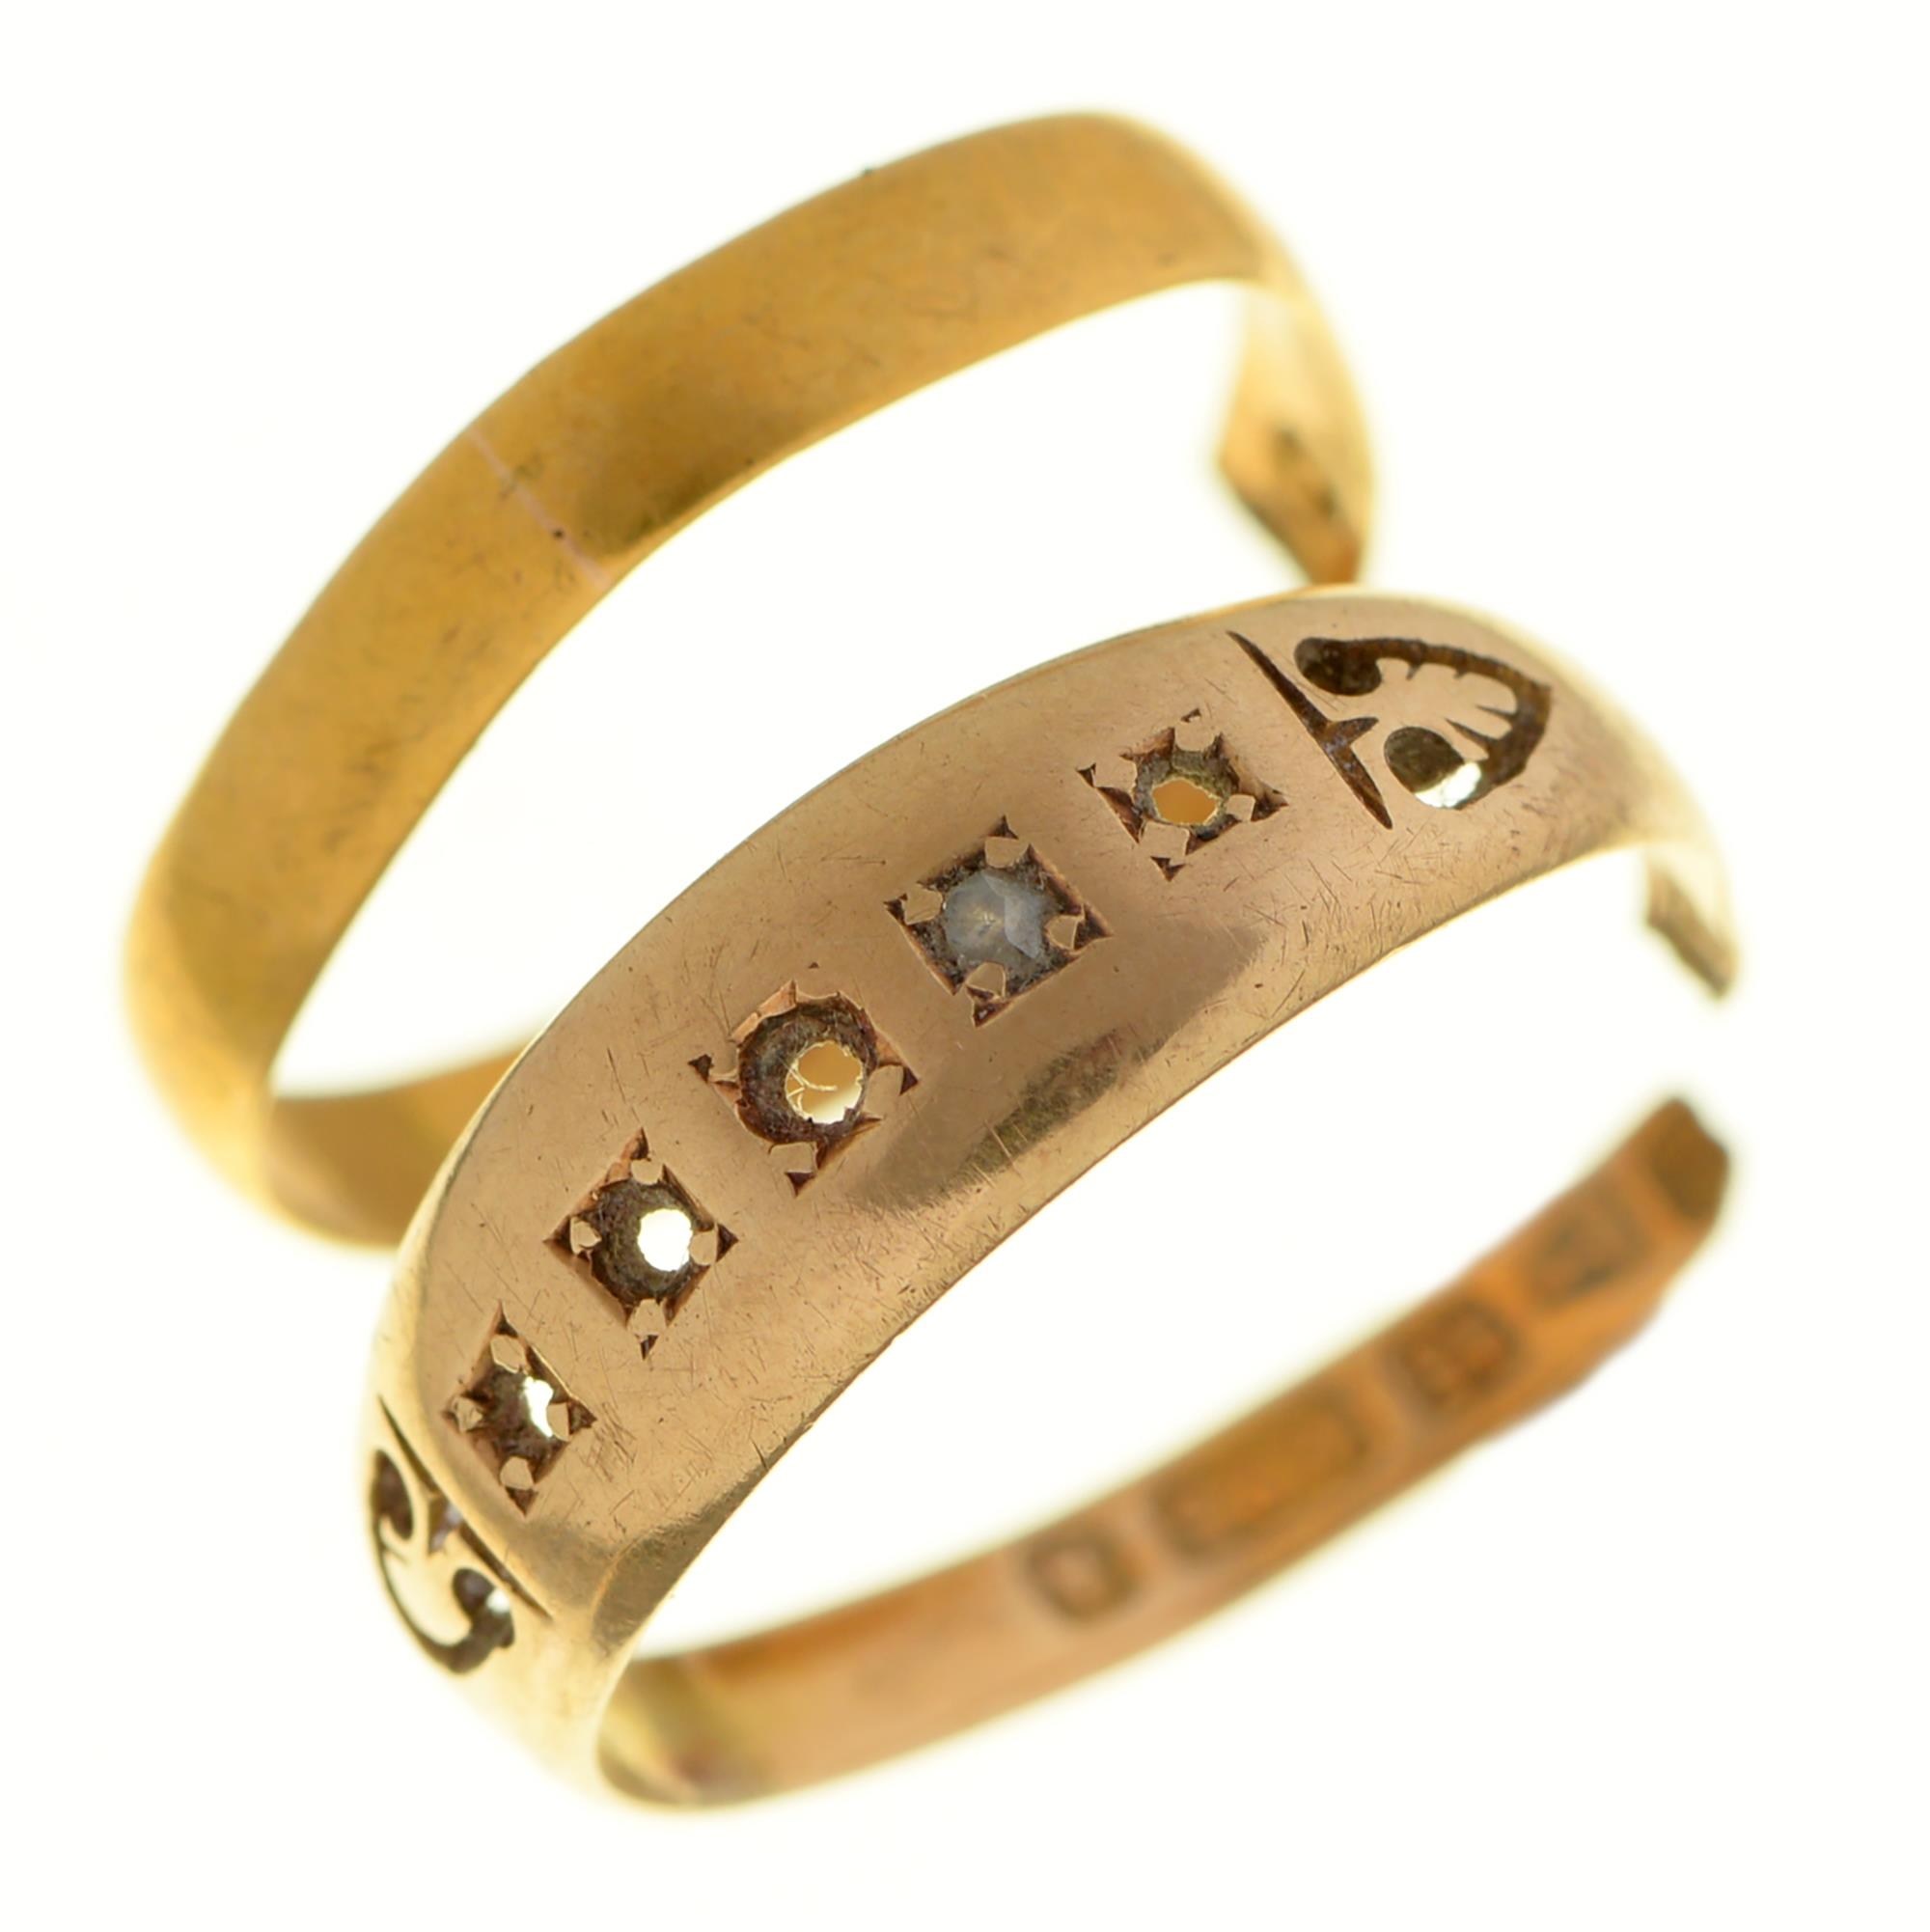 A 22ct gold wedding ring, 1.1g and a 15ct gold ring formerly gem set, 2g (2) Both damaged